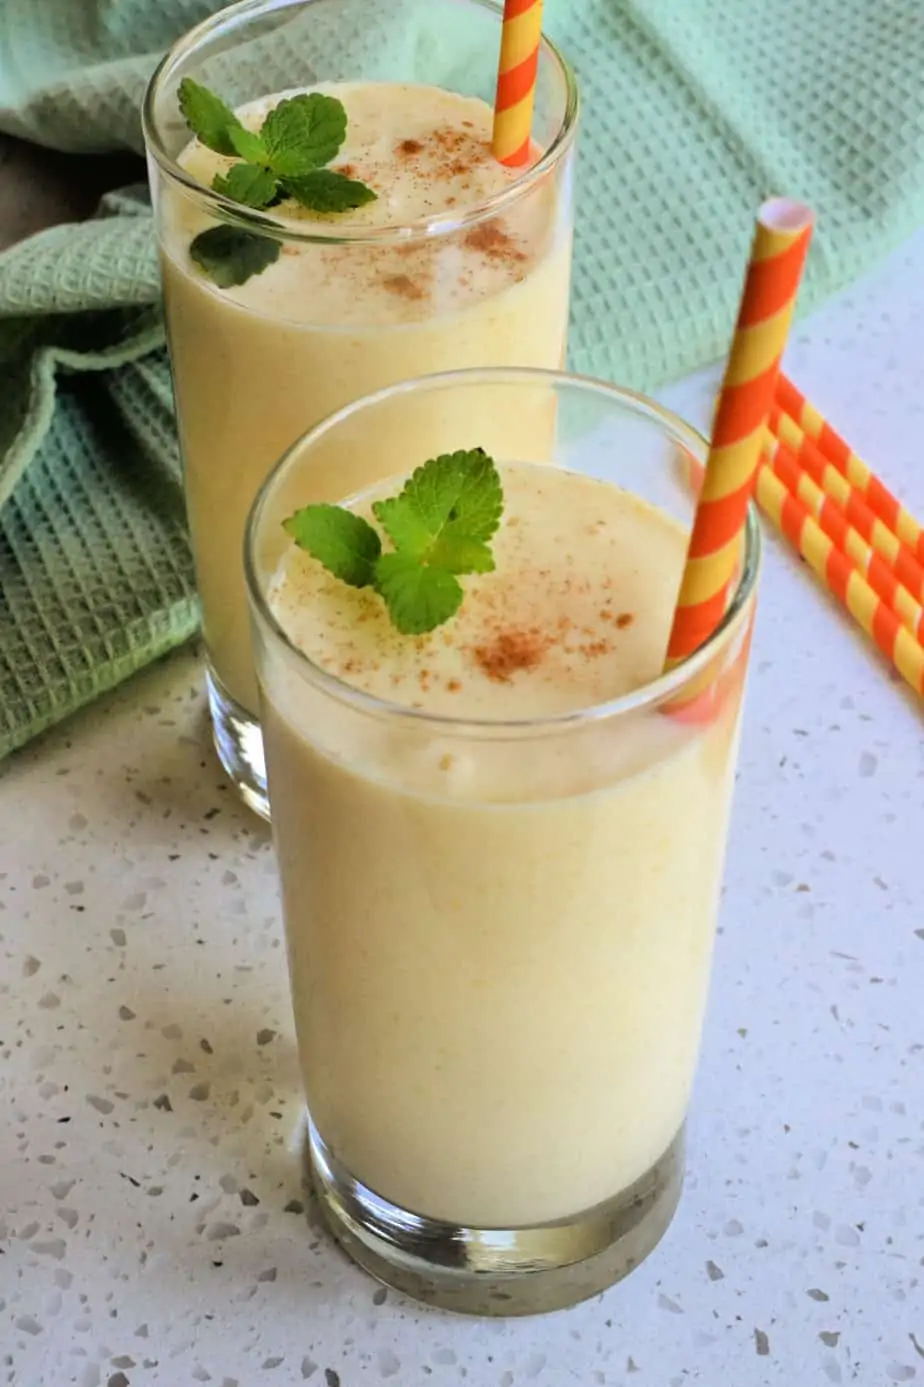 This quick and easy refreshing Mango Lassi is the perfect balance of sweet mangoes and tangy yogurt, made easy in a blender in less than ten minutes.  Enjoy them for a quick breakfast treat or dessert.  